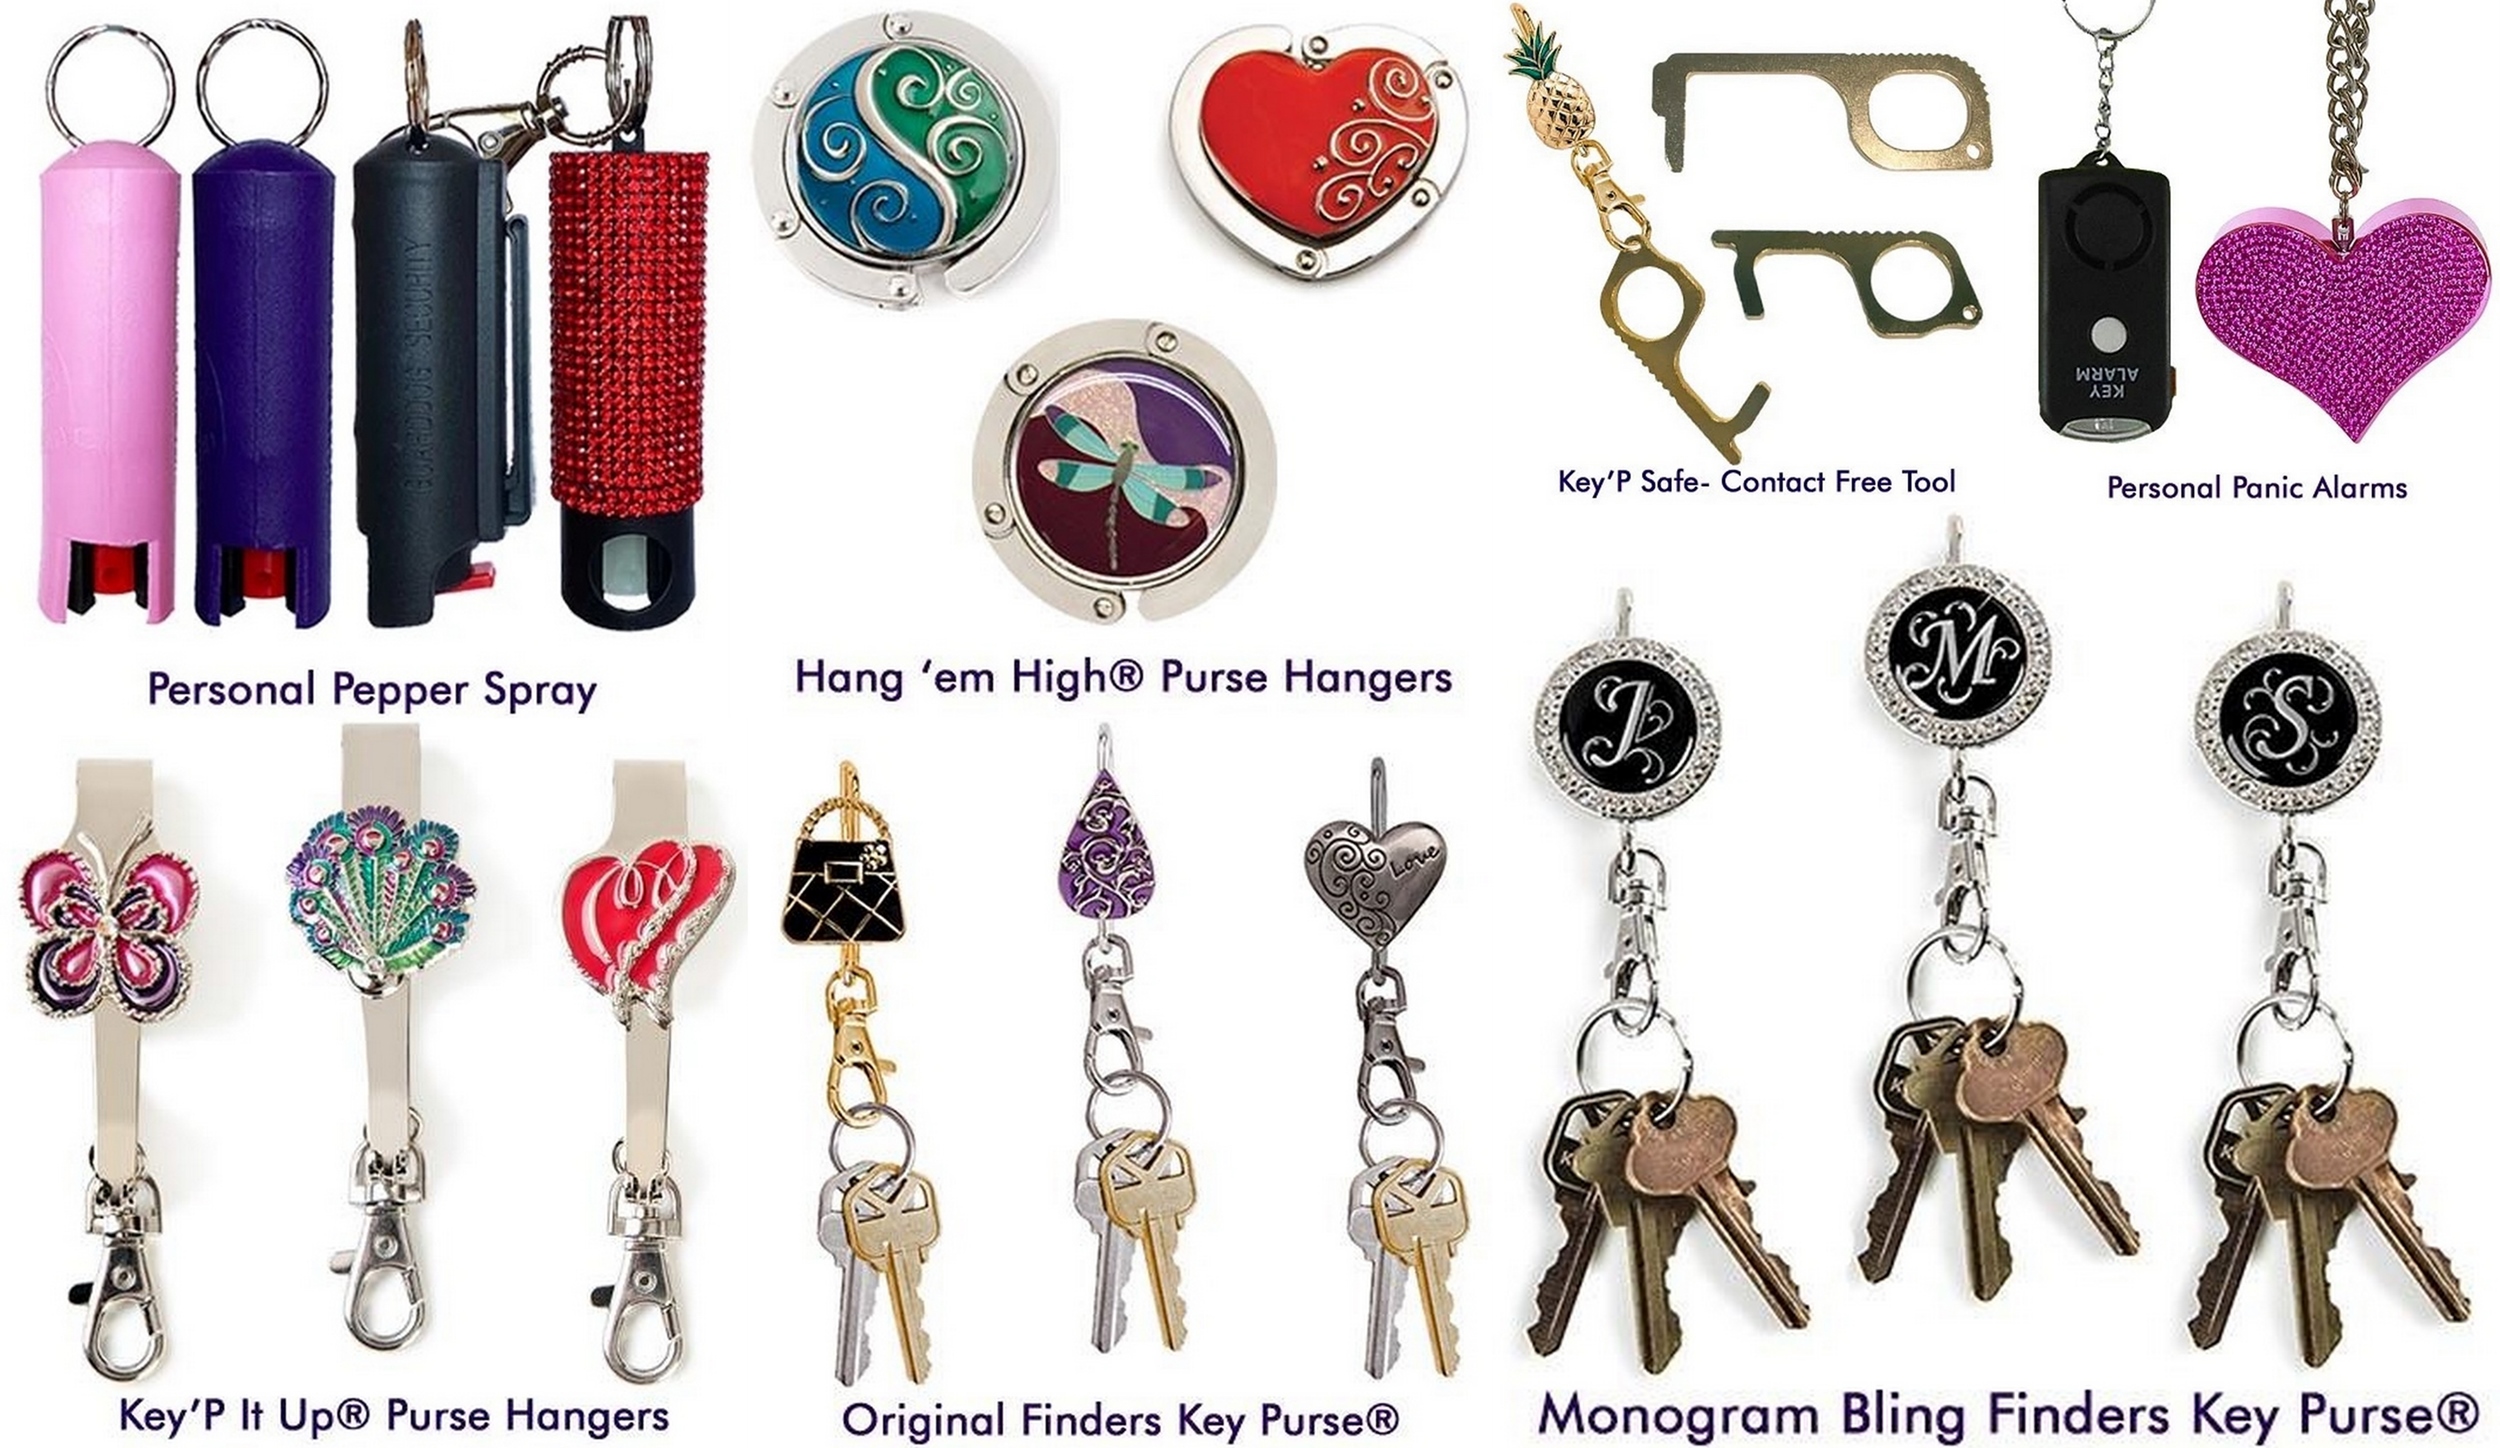 Finders Key Purse: Fill The New Year with Fashion, Function and Safety